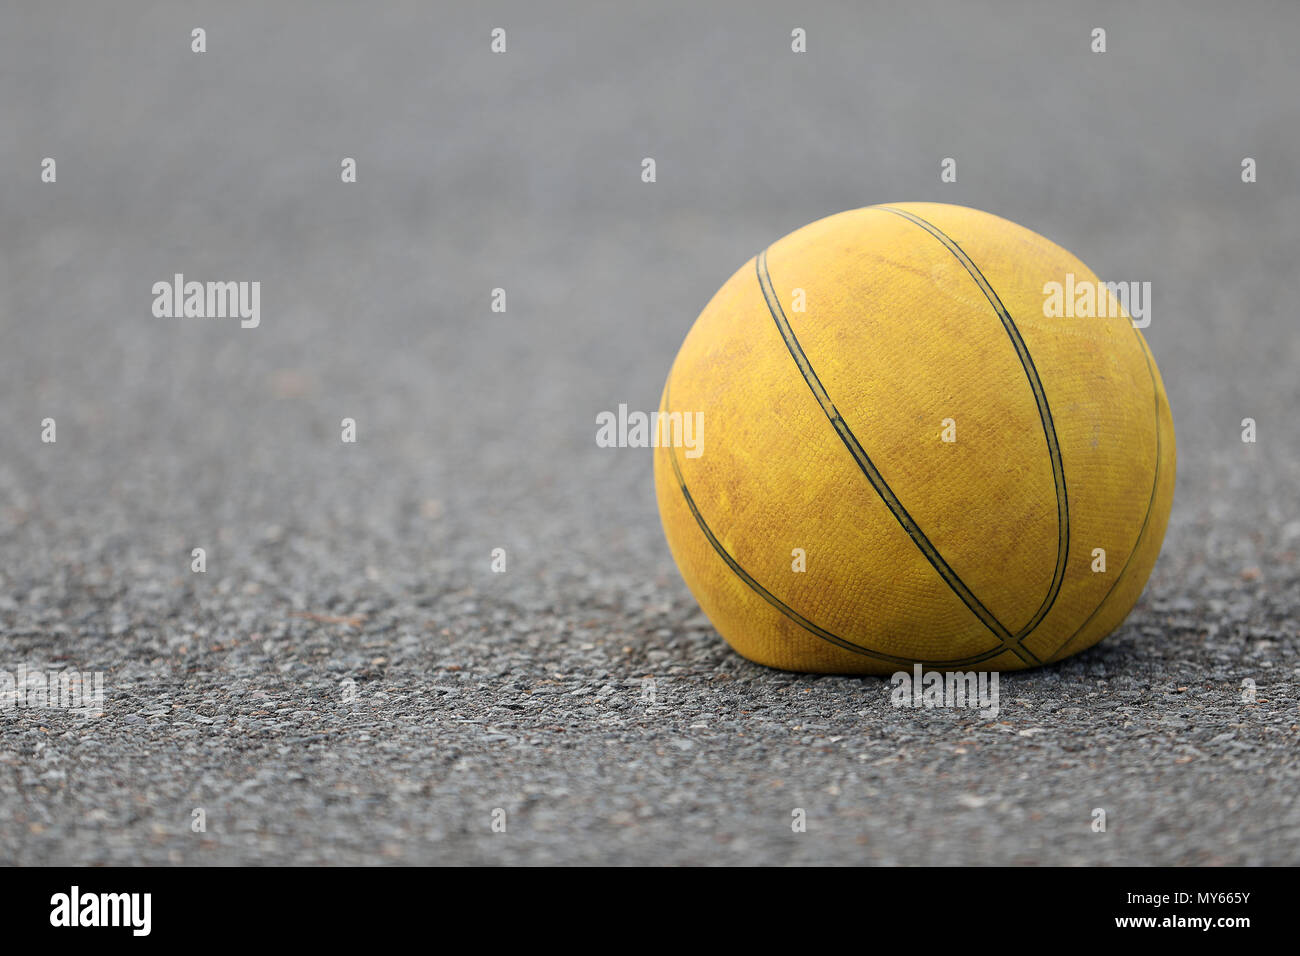 Right hand focus, close up of old tired deflated let down yellow basketball on a road surafce concept. needs air, worn out spent and discarded sport e Stock Photo